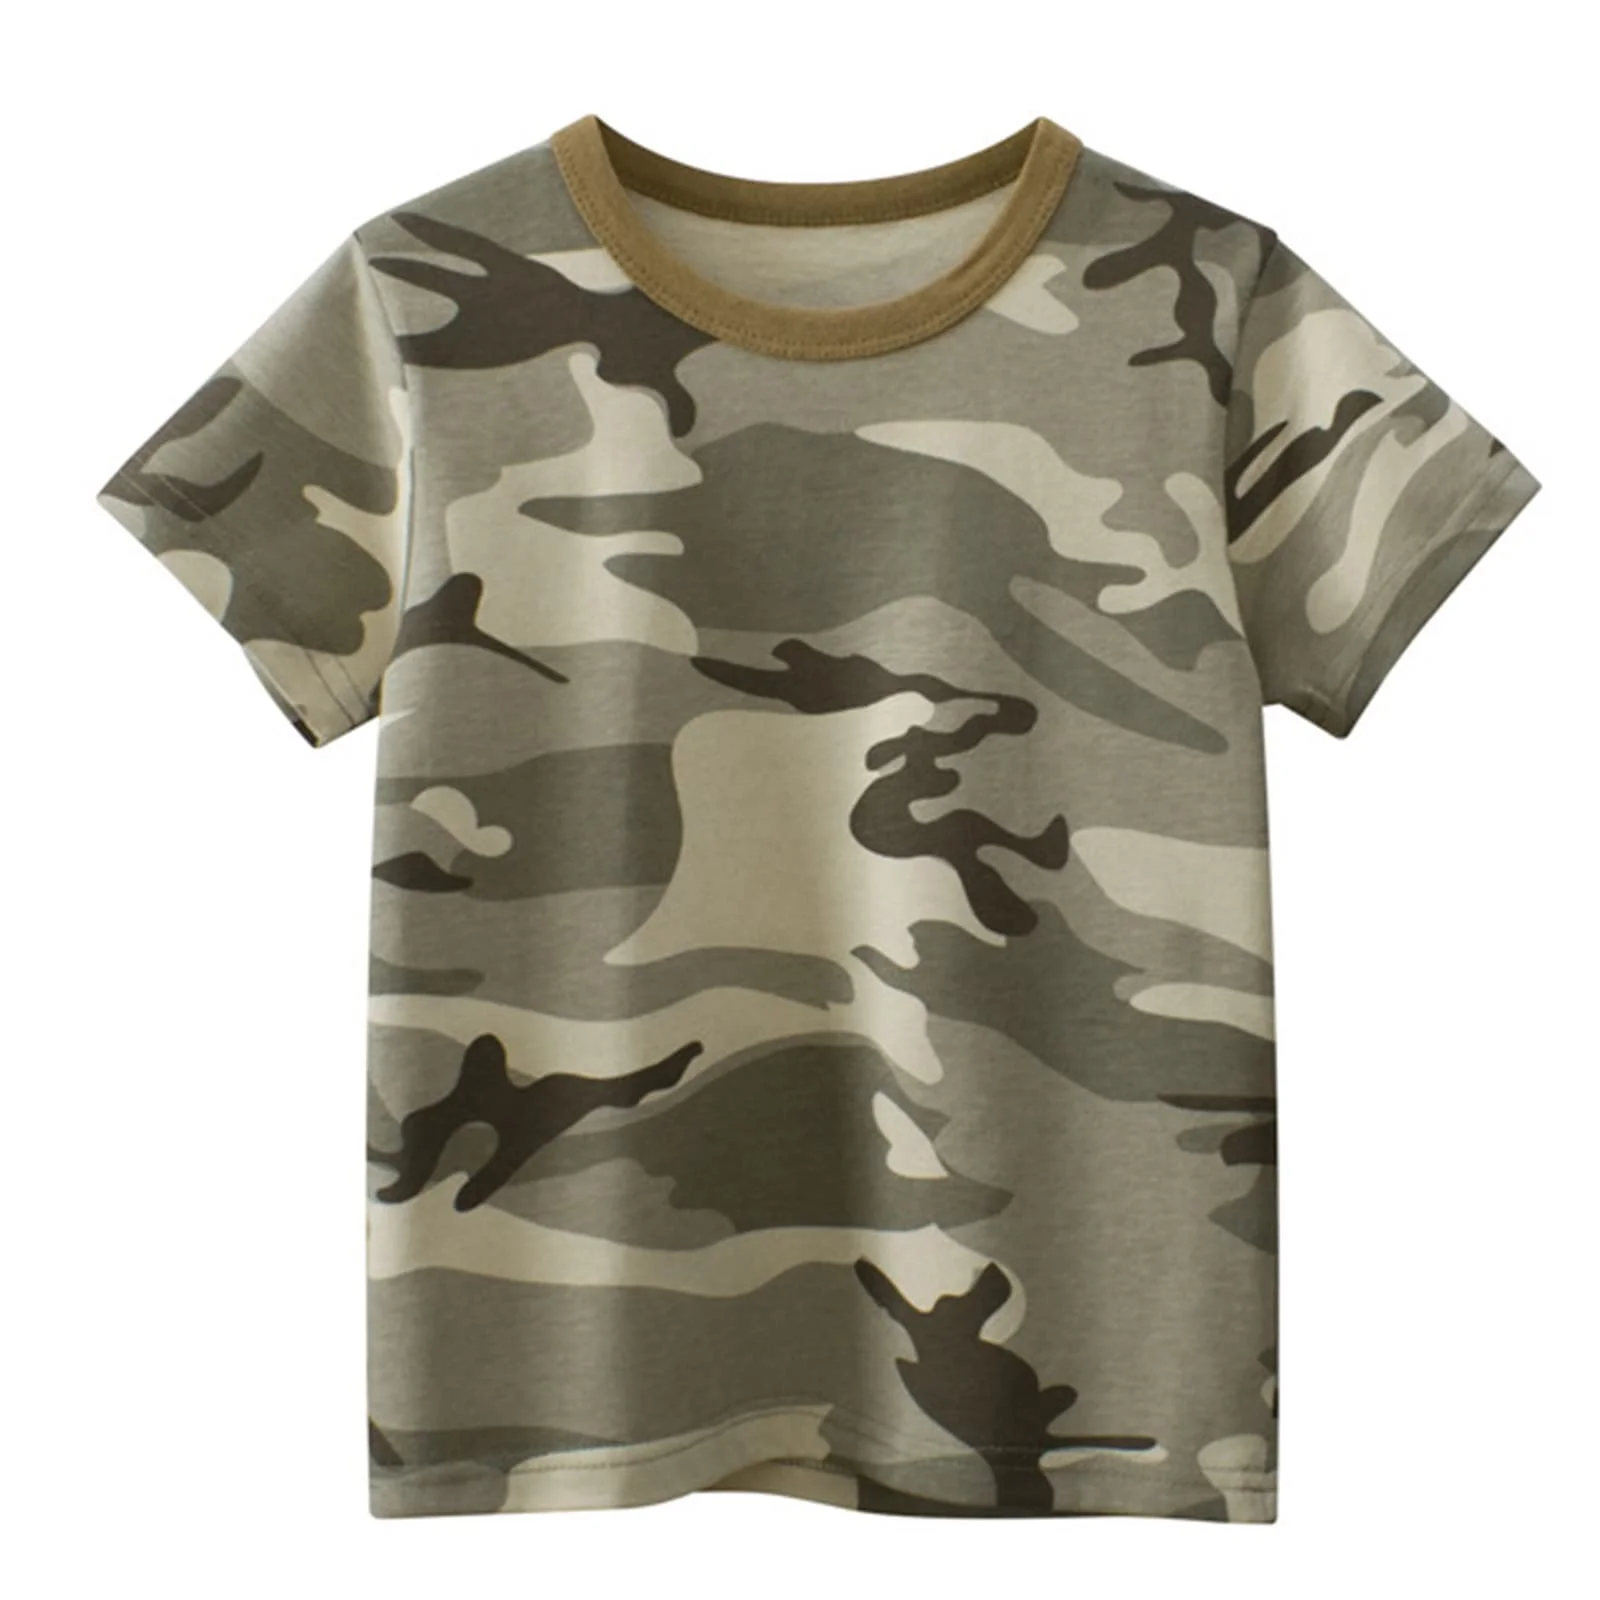 Kids Baby Boys Girls Camouflage T Shirts from Bangladesh Factory